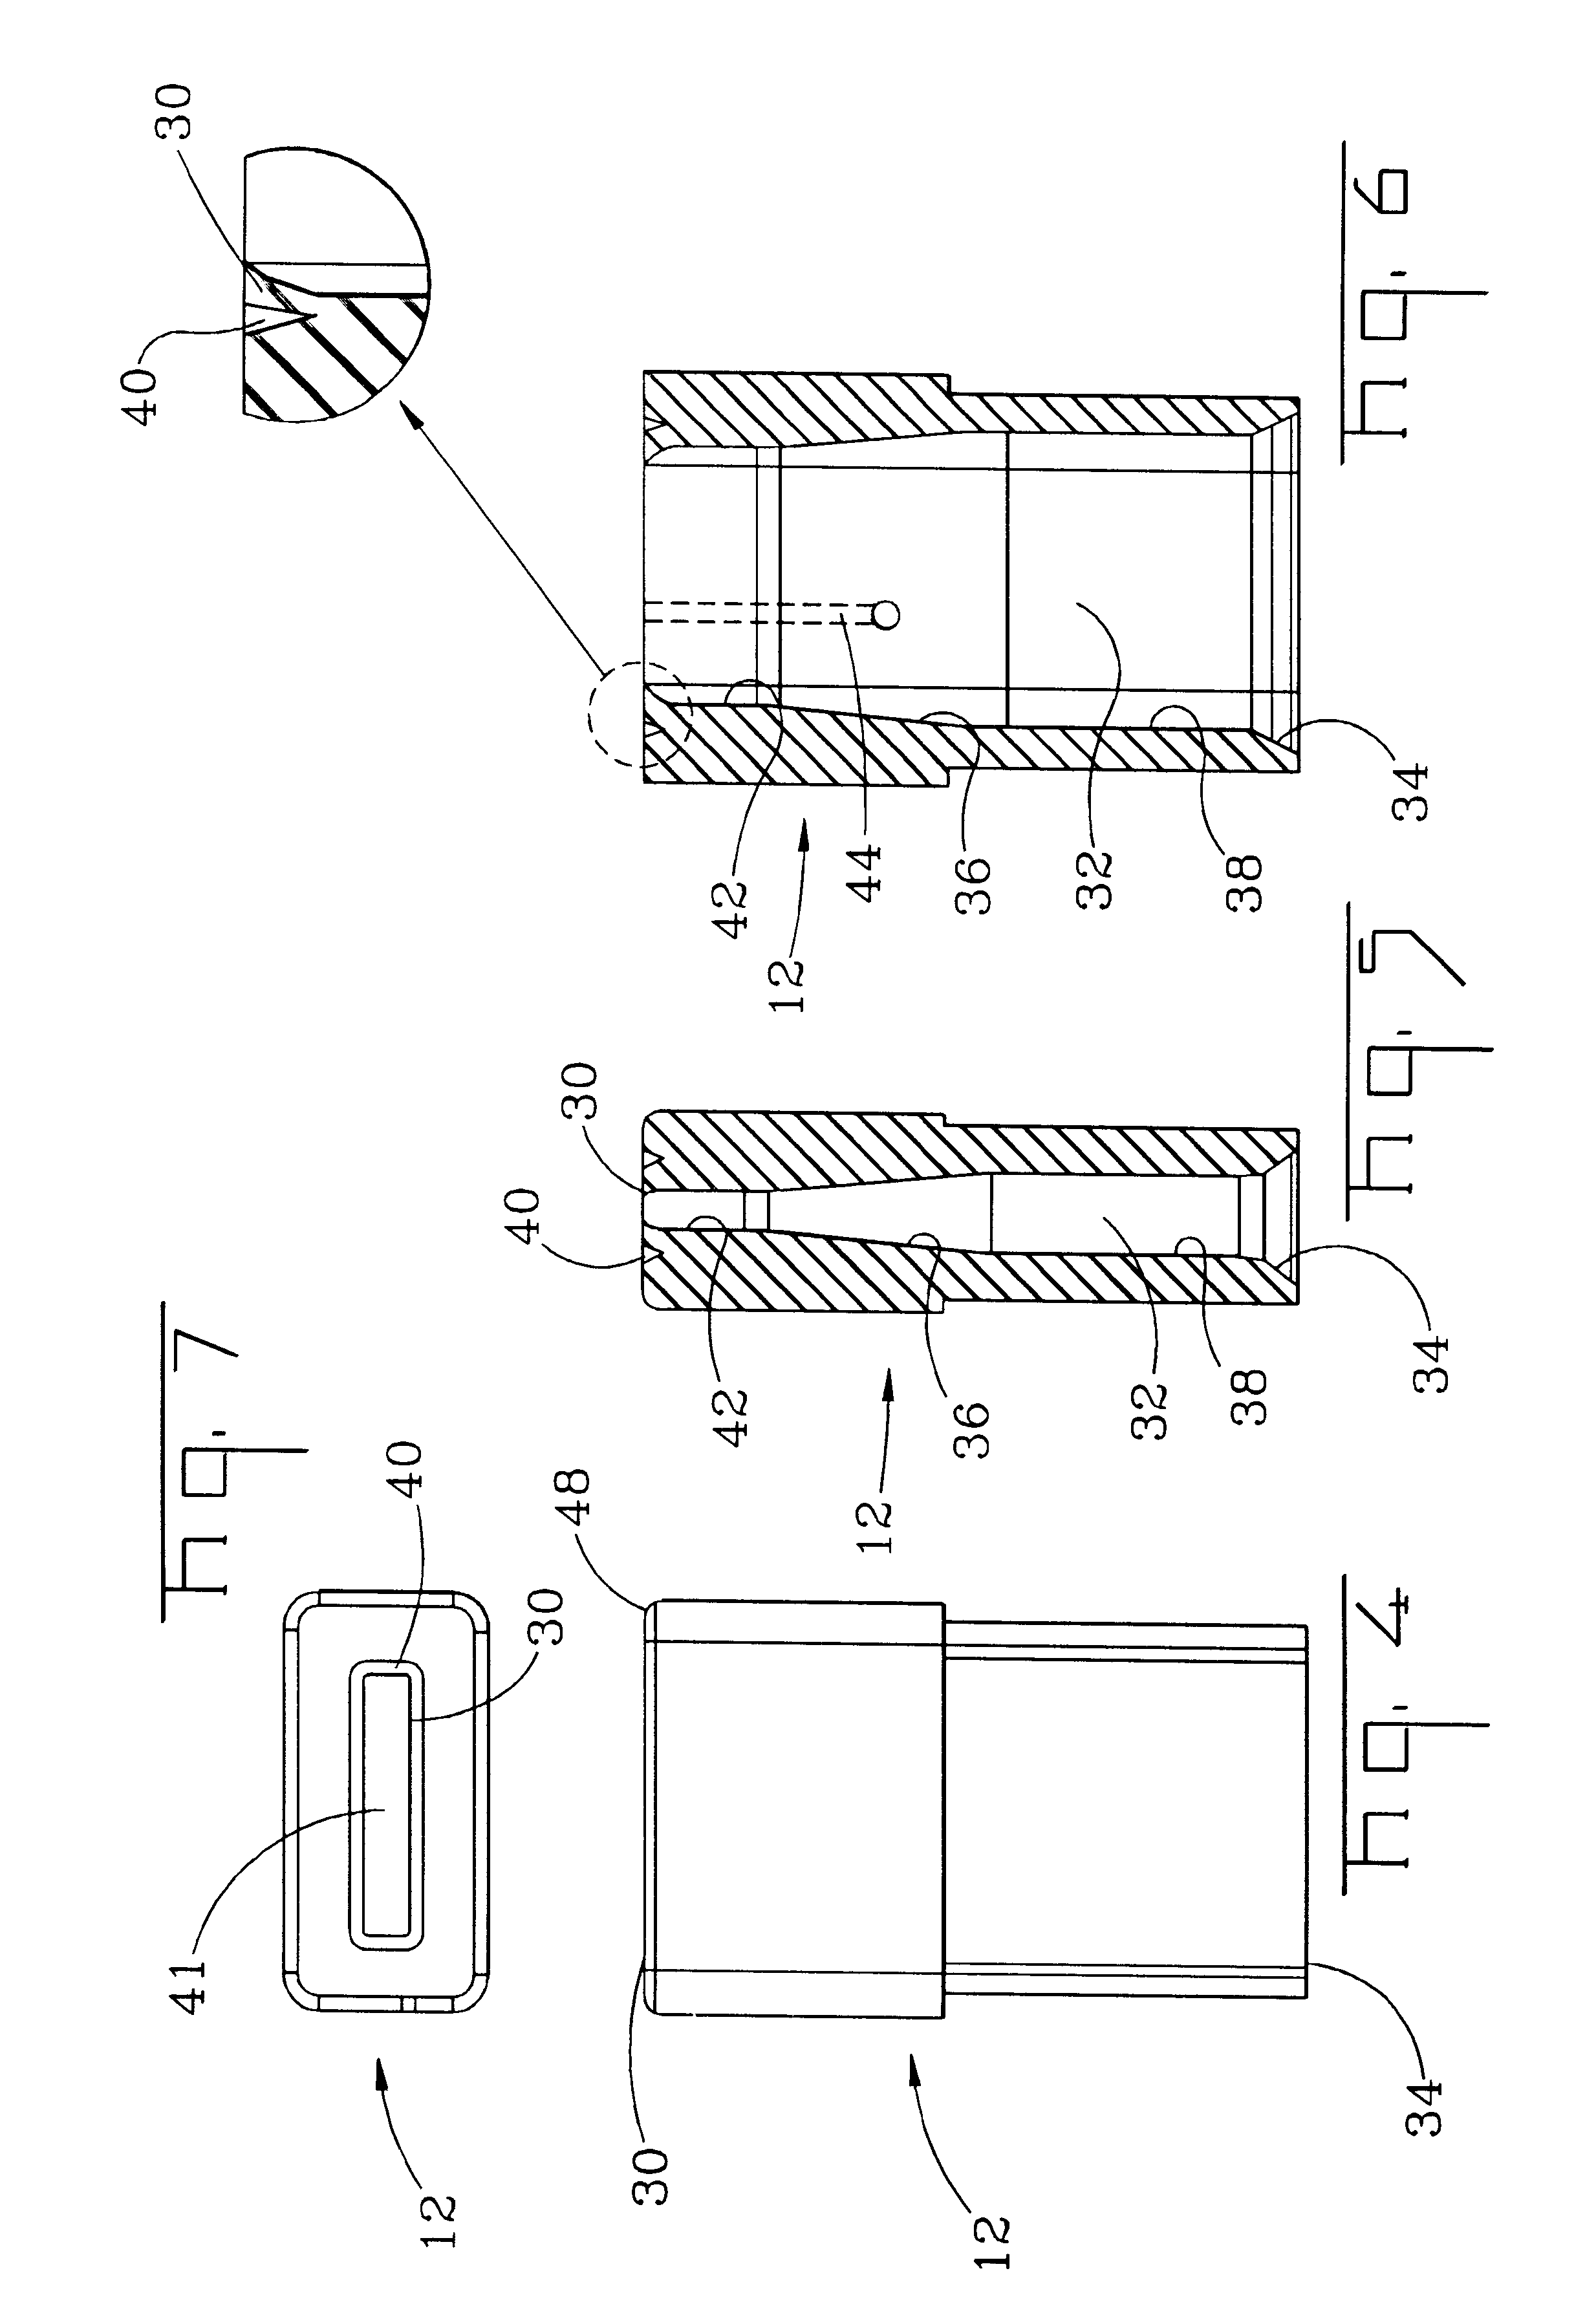 Ferrule boot for optical connectors